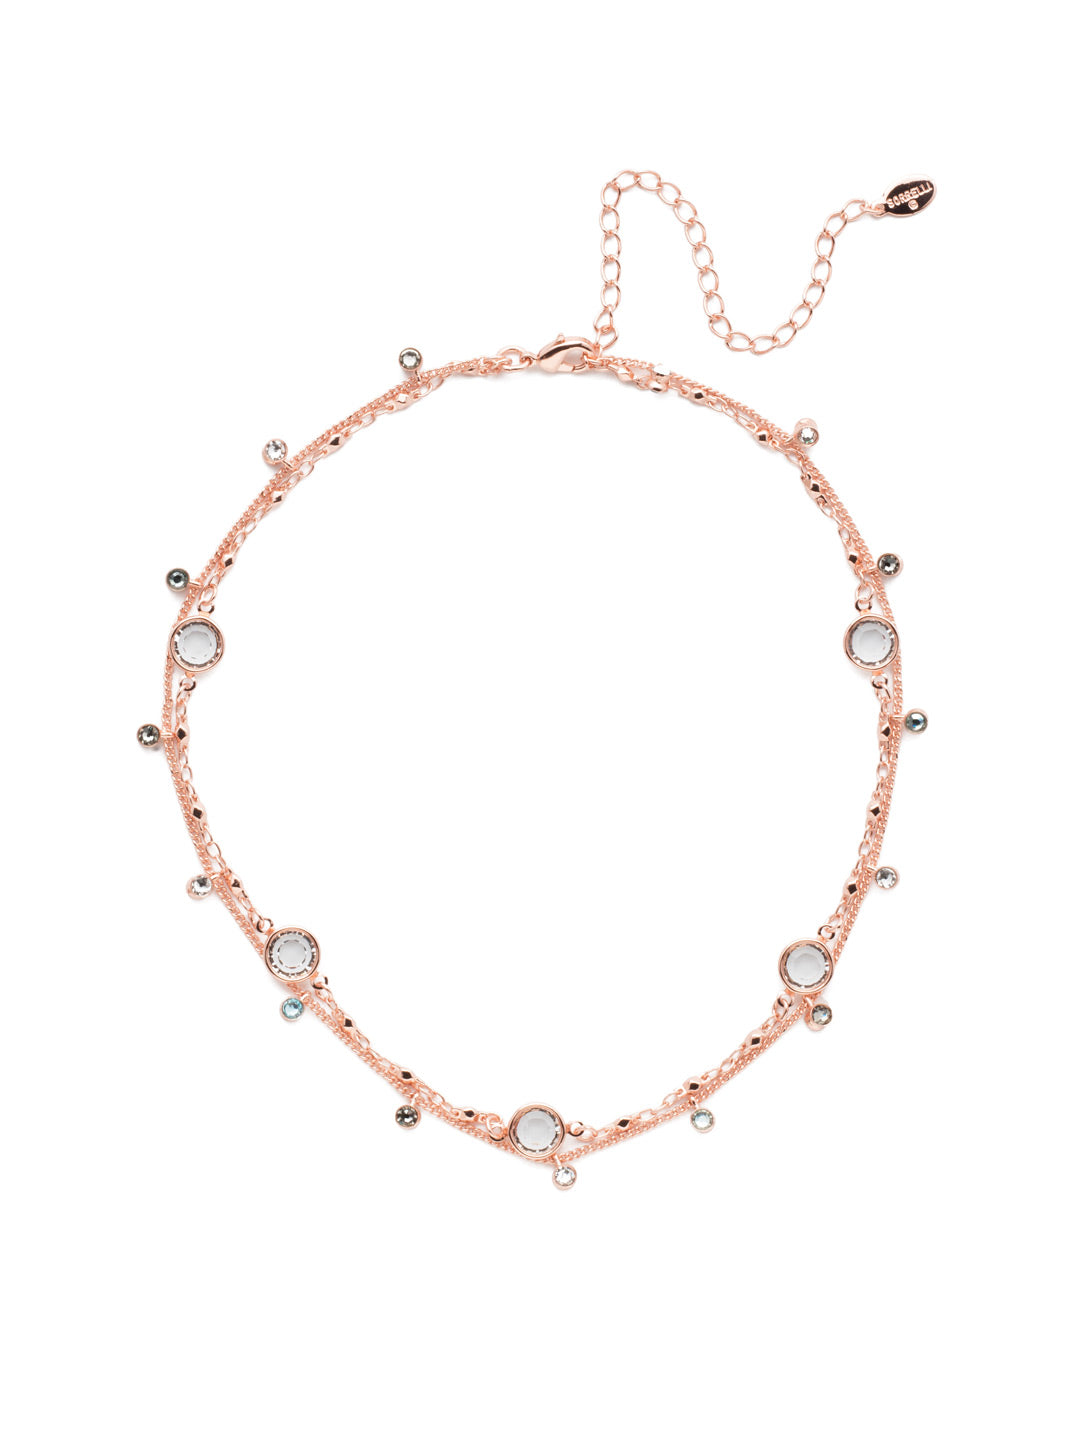 Dewdrop Layered Necklace - NEK36RGCAZ - Delicate layers of chain drizzled with droplets of opaque crystals. A quick and easy solution for a layered look with one piece. From Sorrelli's Crystal Azure collection in our Rose Gold-tone finish.